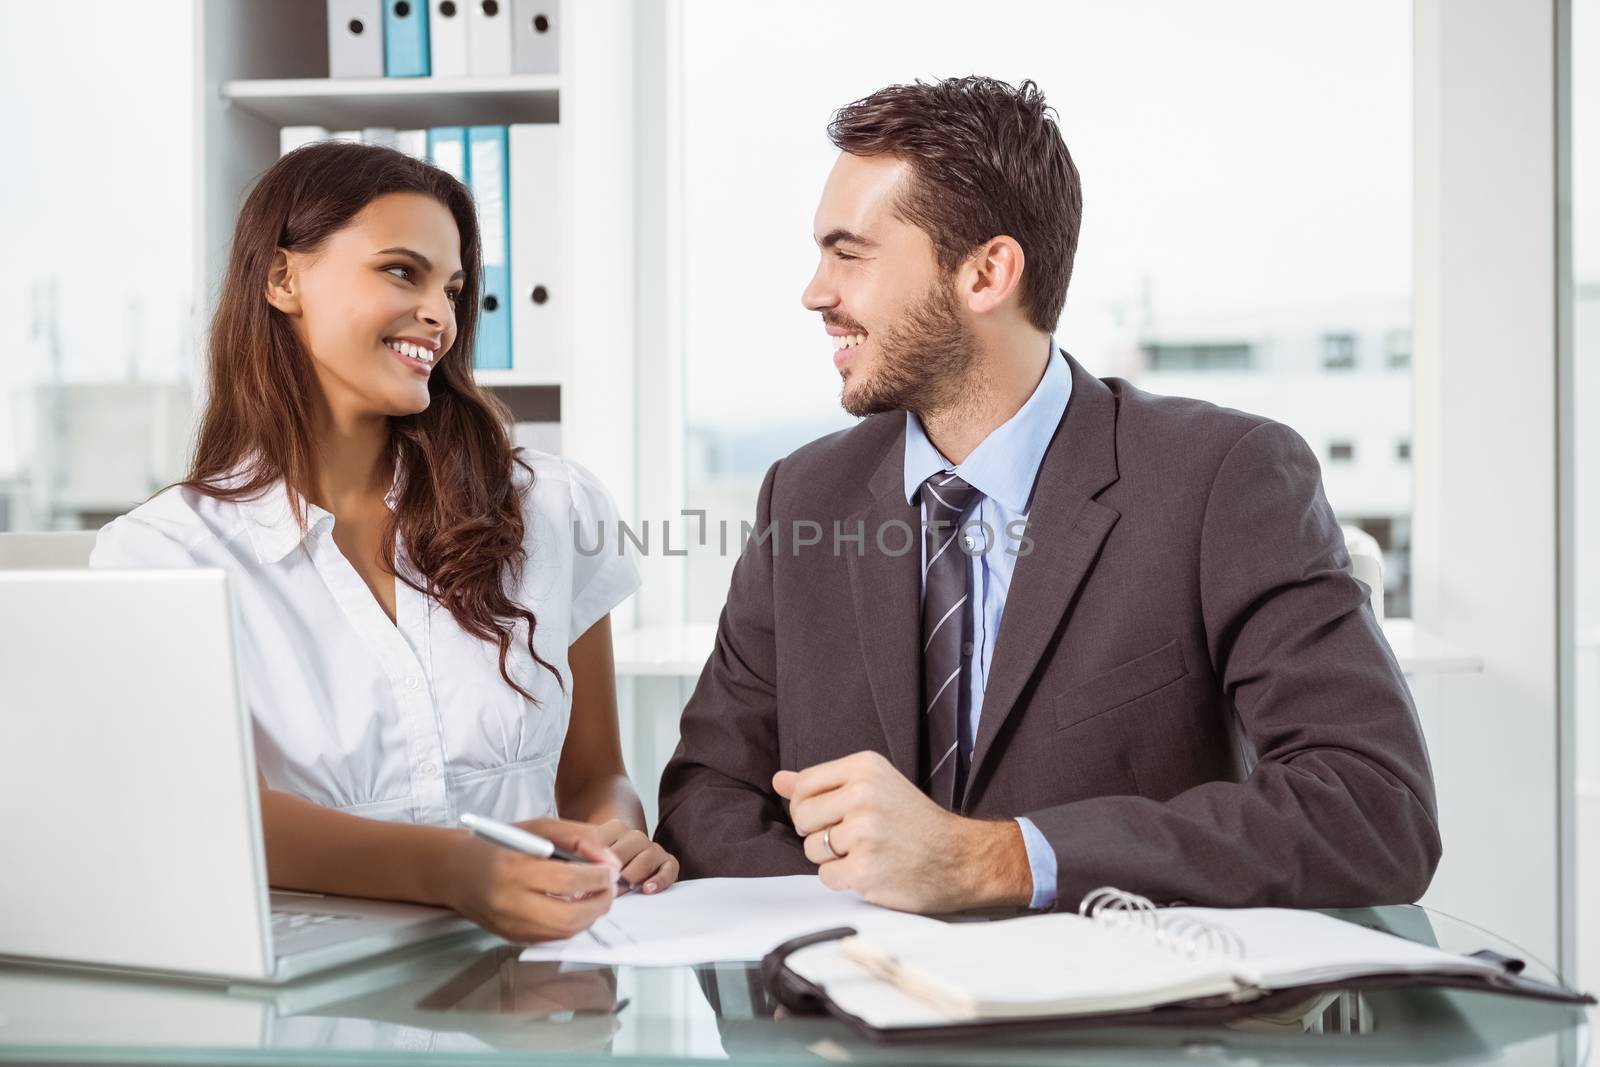 Two young business people in meeting at office